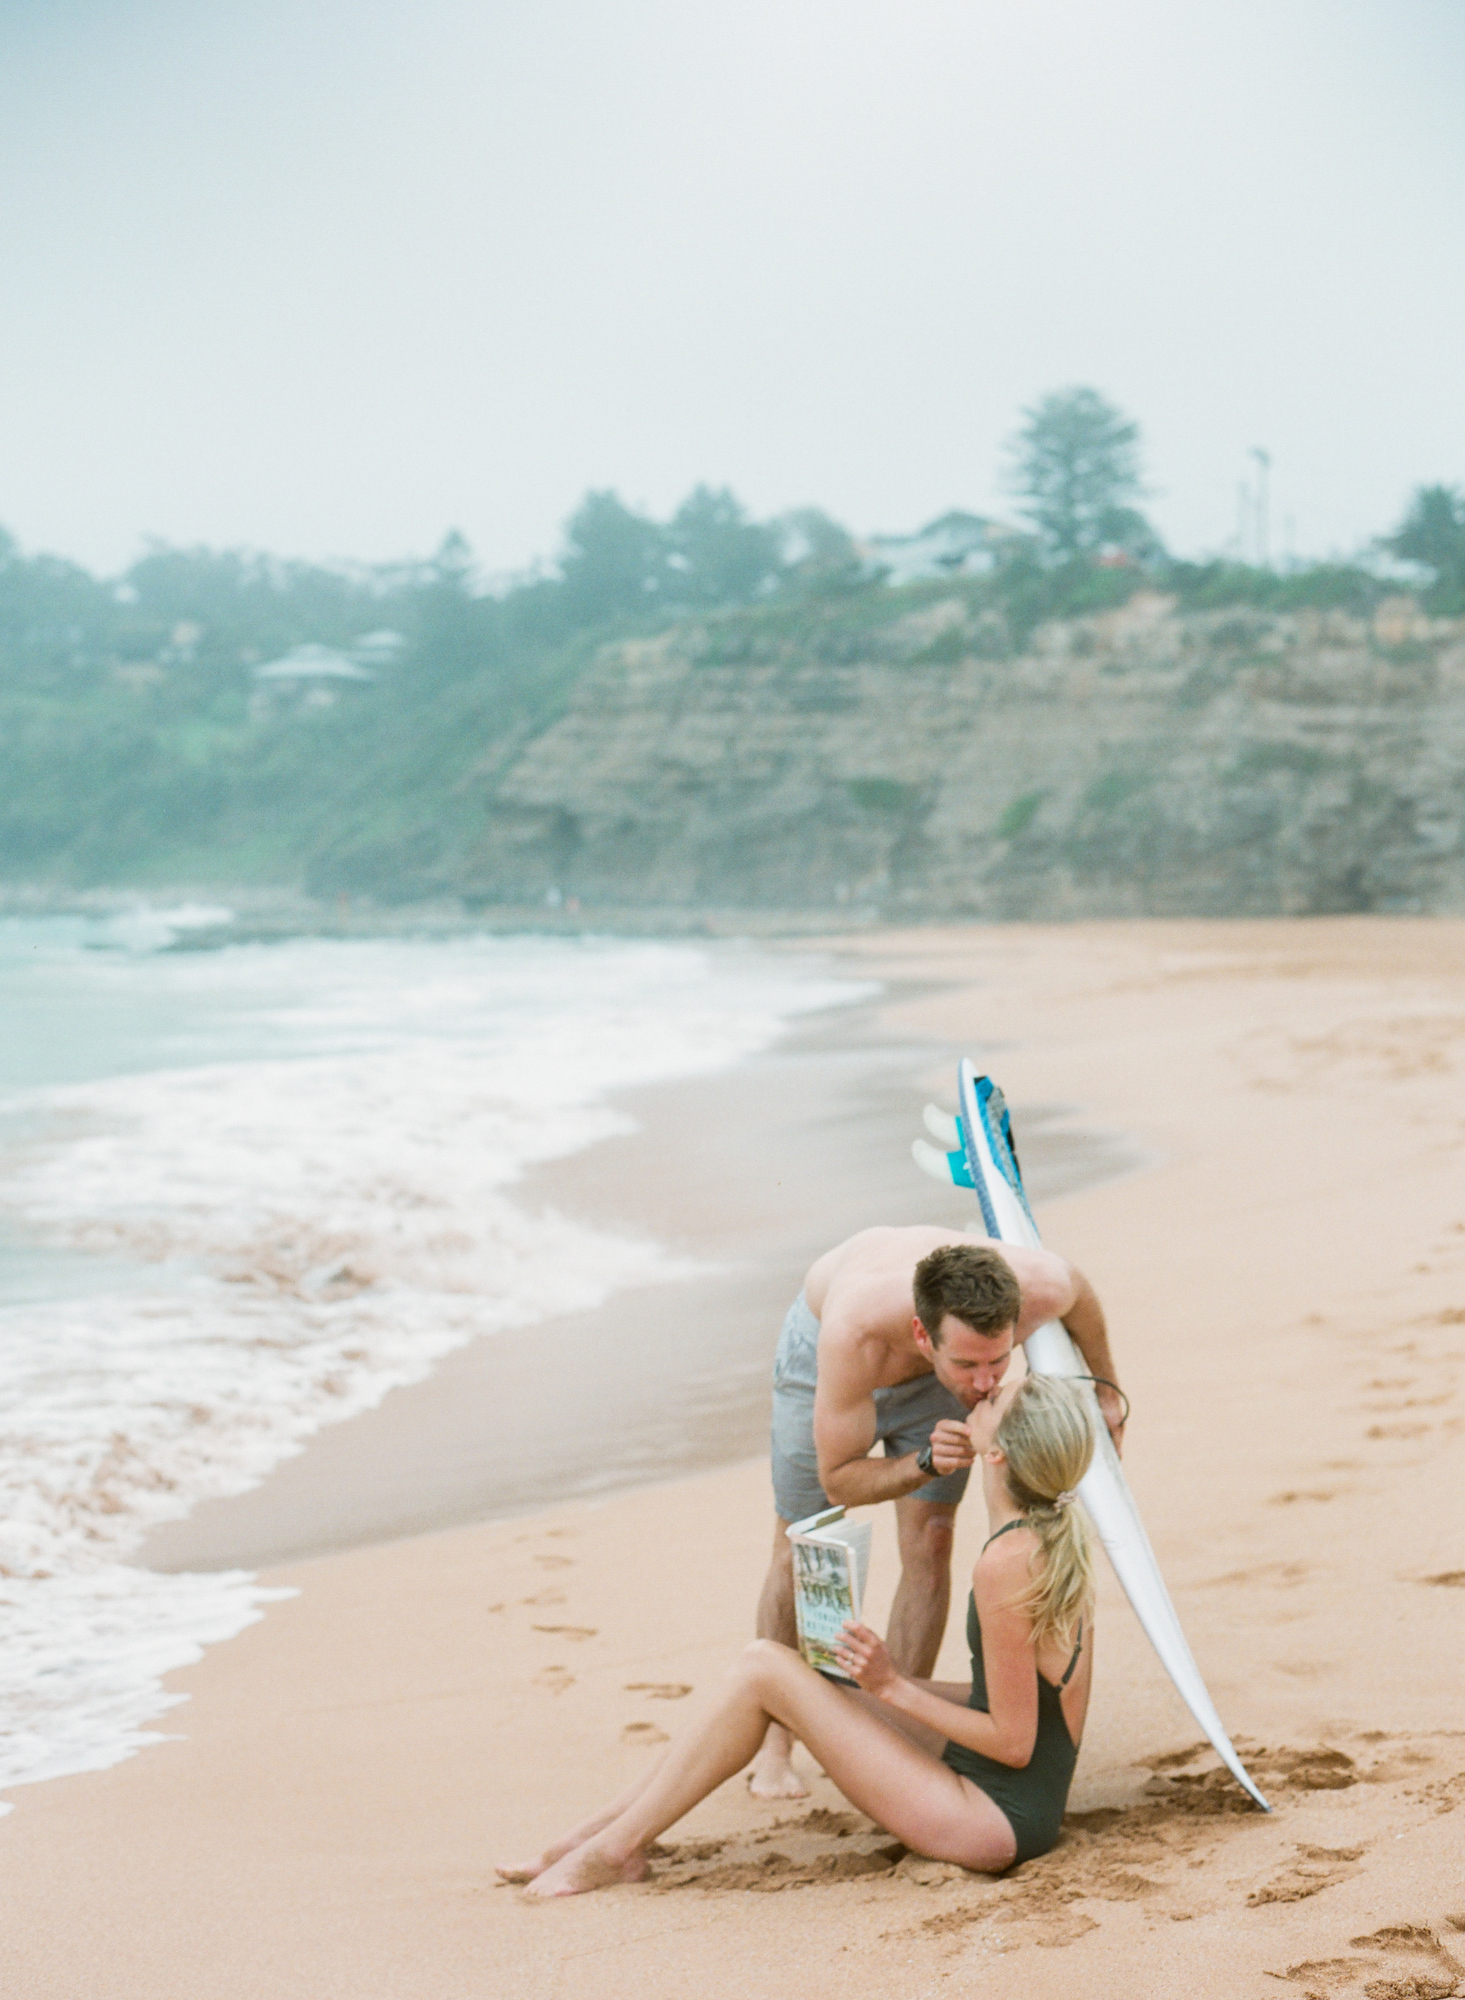 Fiance holding surf board kissing bride to be at Avalon beach in sydney for an engagement shoot with Amelia Soegijono who is a fine art film photographer